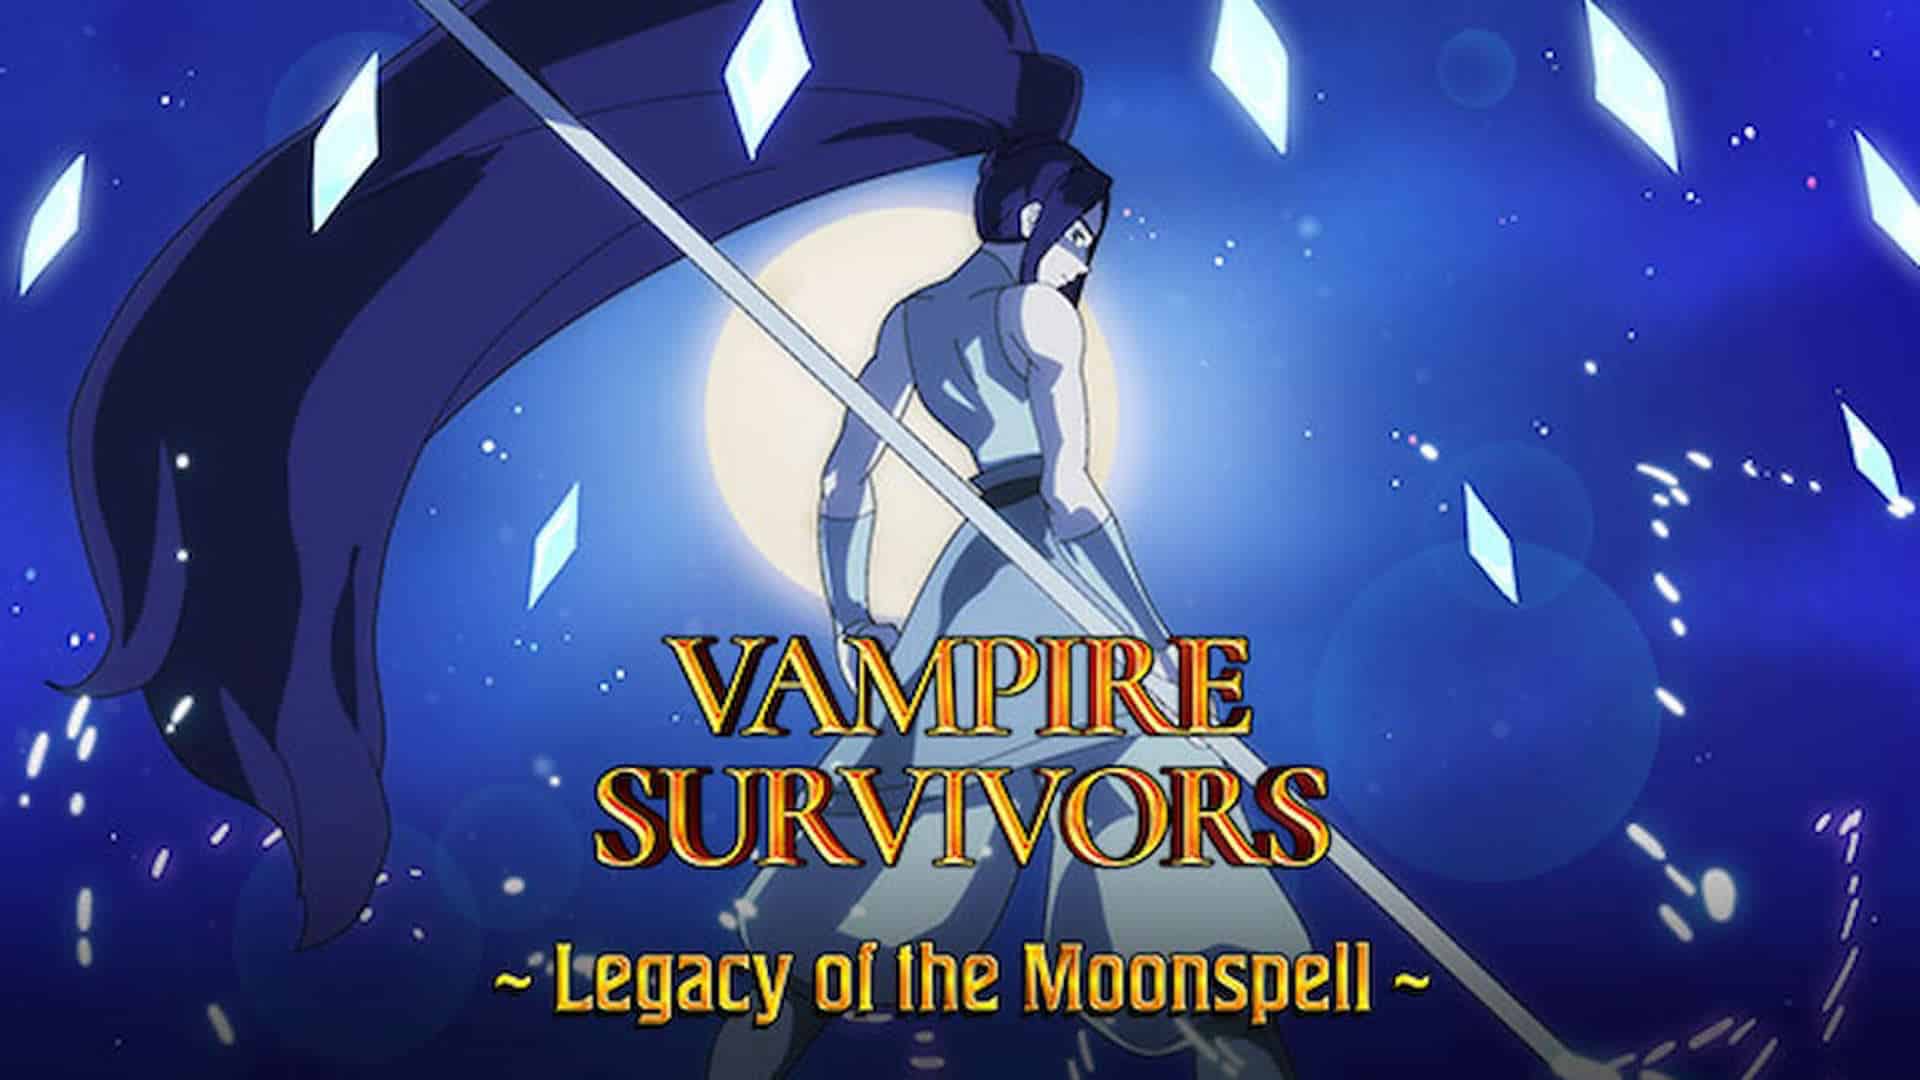 Vampire Survivors First Expansion, Legacy of the Moonspell